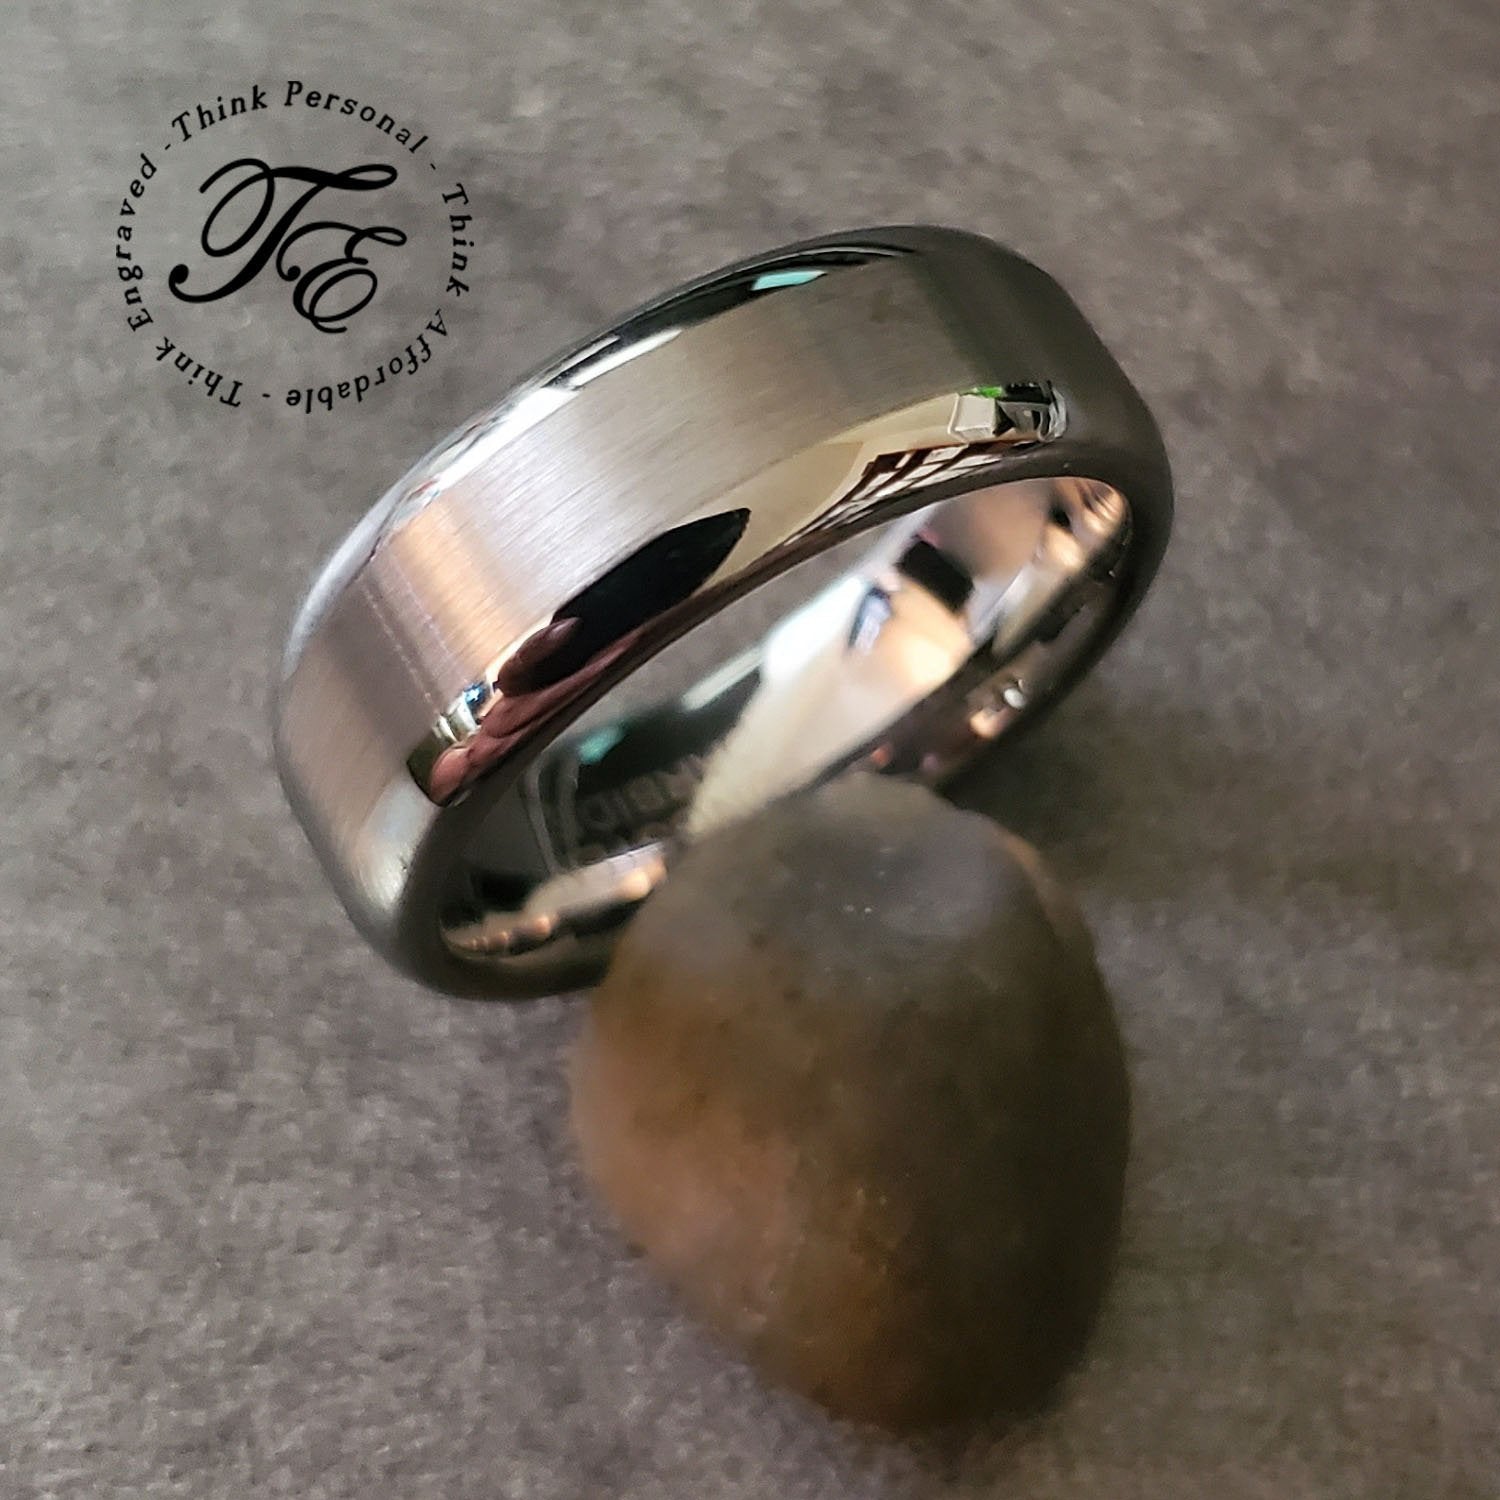 ThinkEngraved wedding Band Personalized Men's Tungsten Wedding Ring - Brushed Steel Outer Band